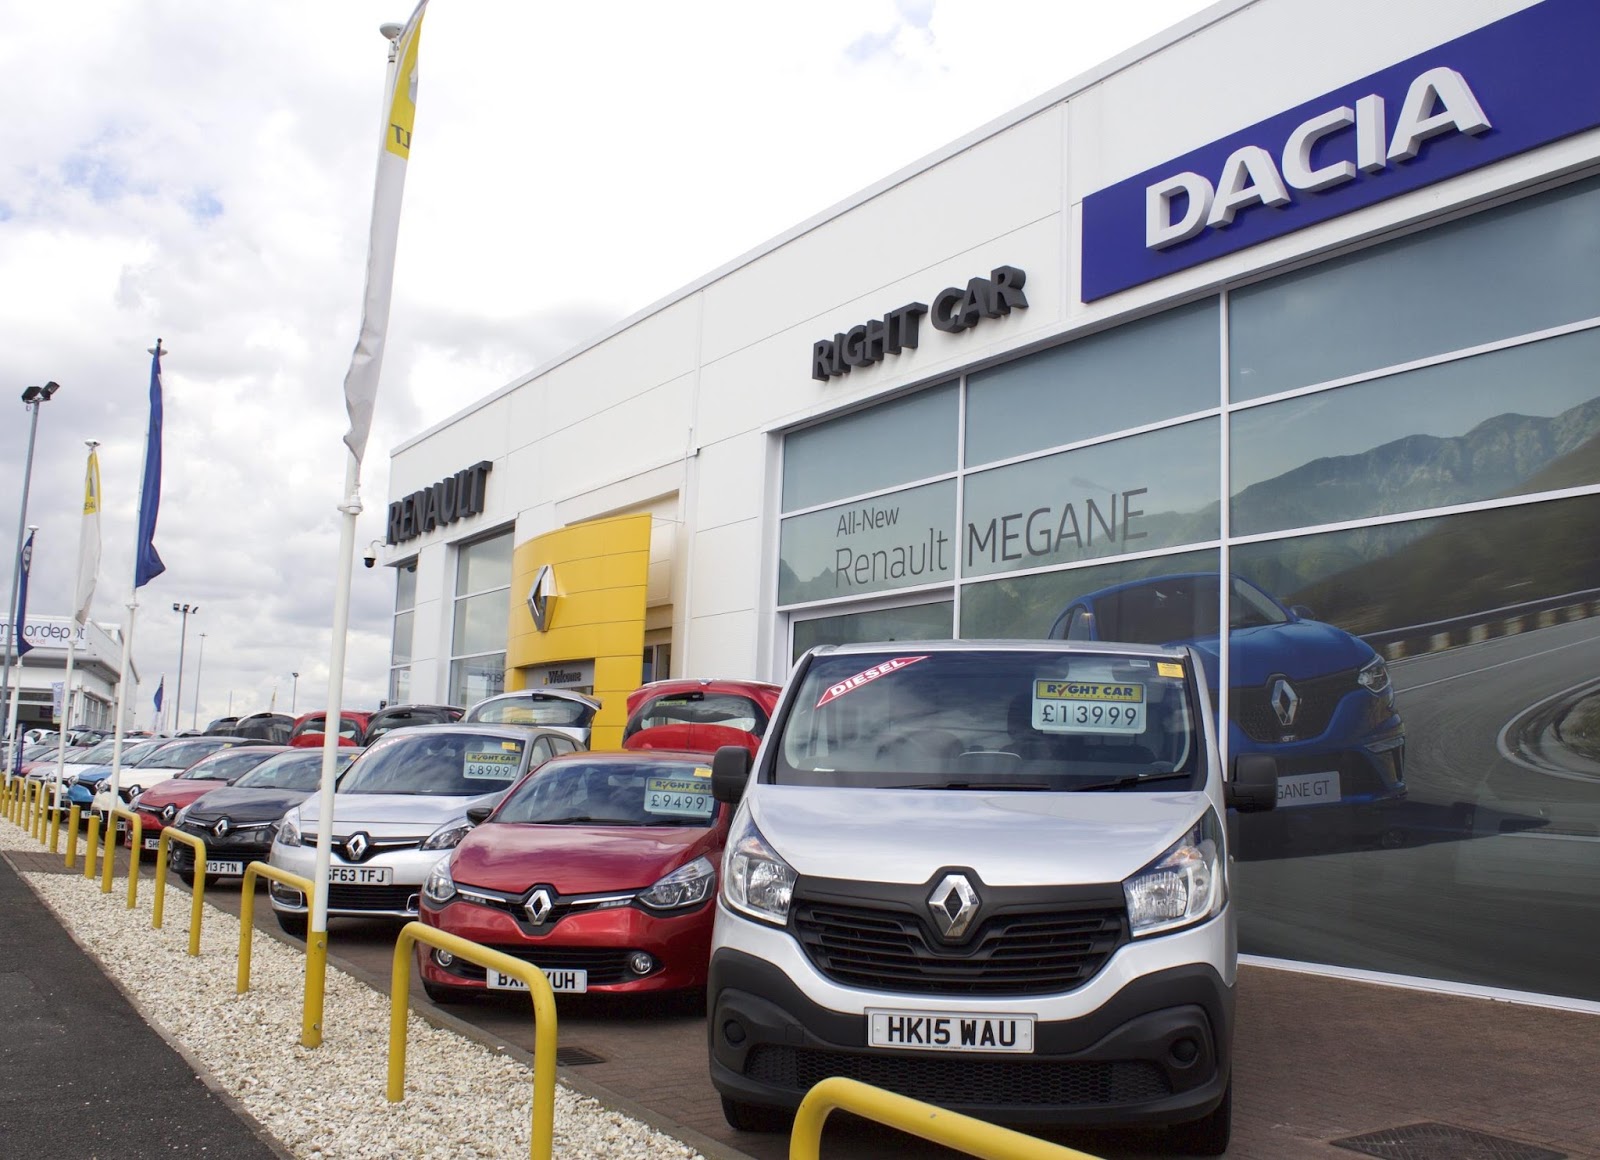 The Motoring World: New Renault and Dacia dealership opens in Grimsby